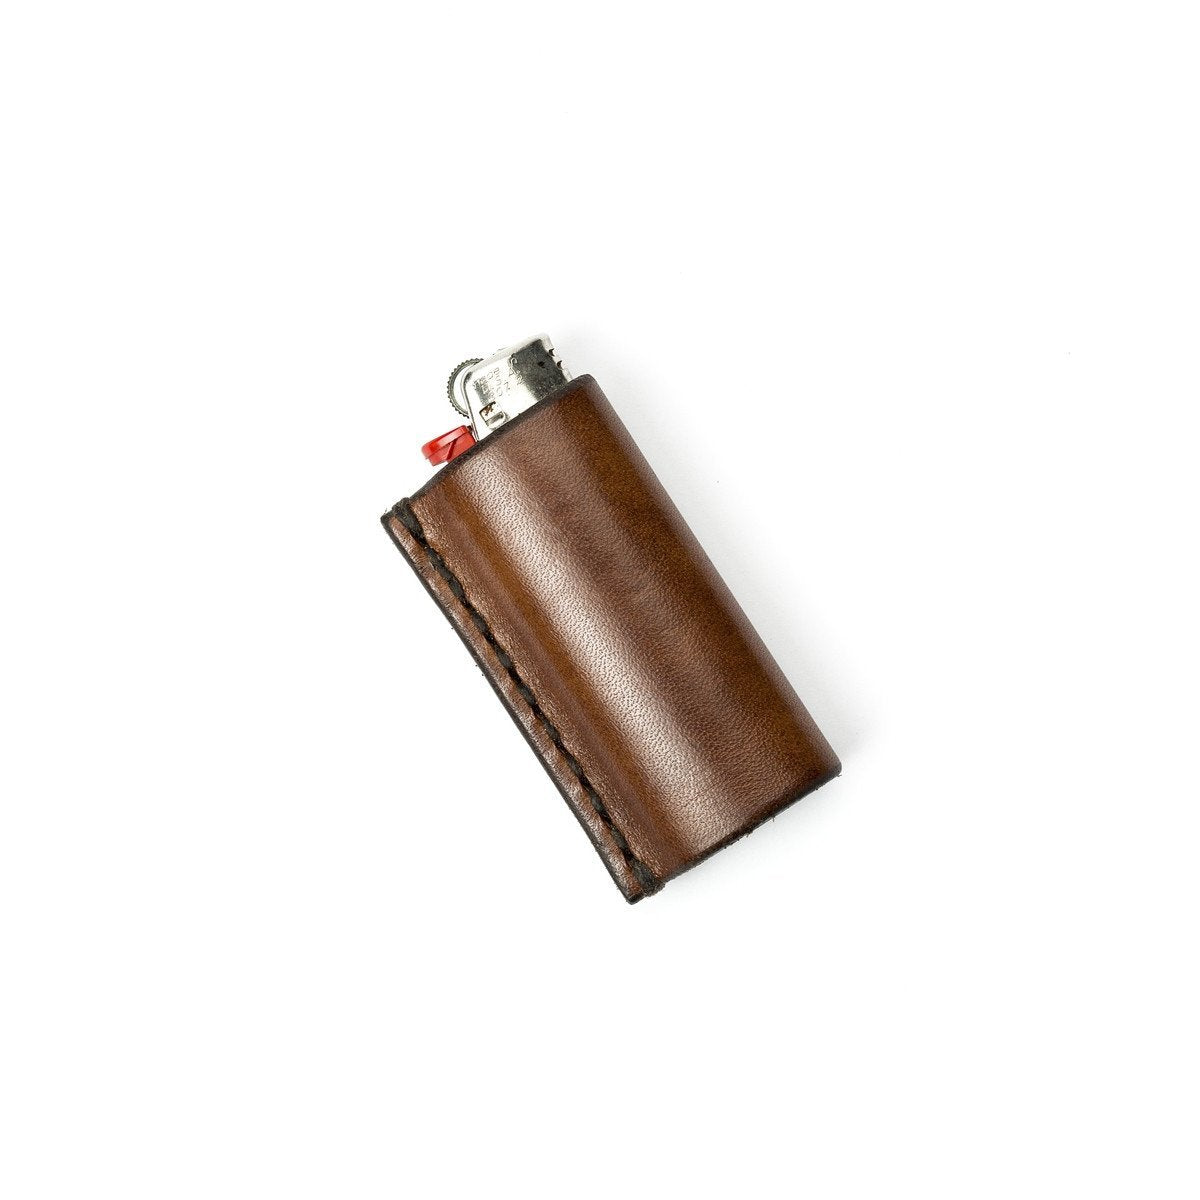 Bic Lighter Case & Matching Keychain - Hand made to order in Horween Leather